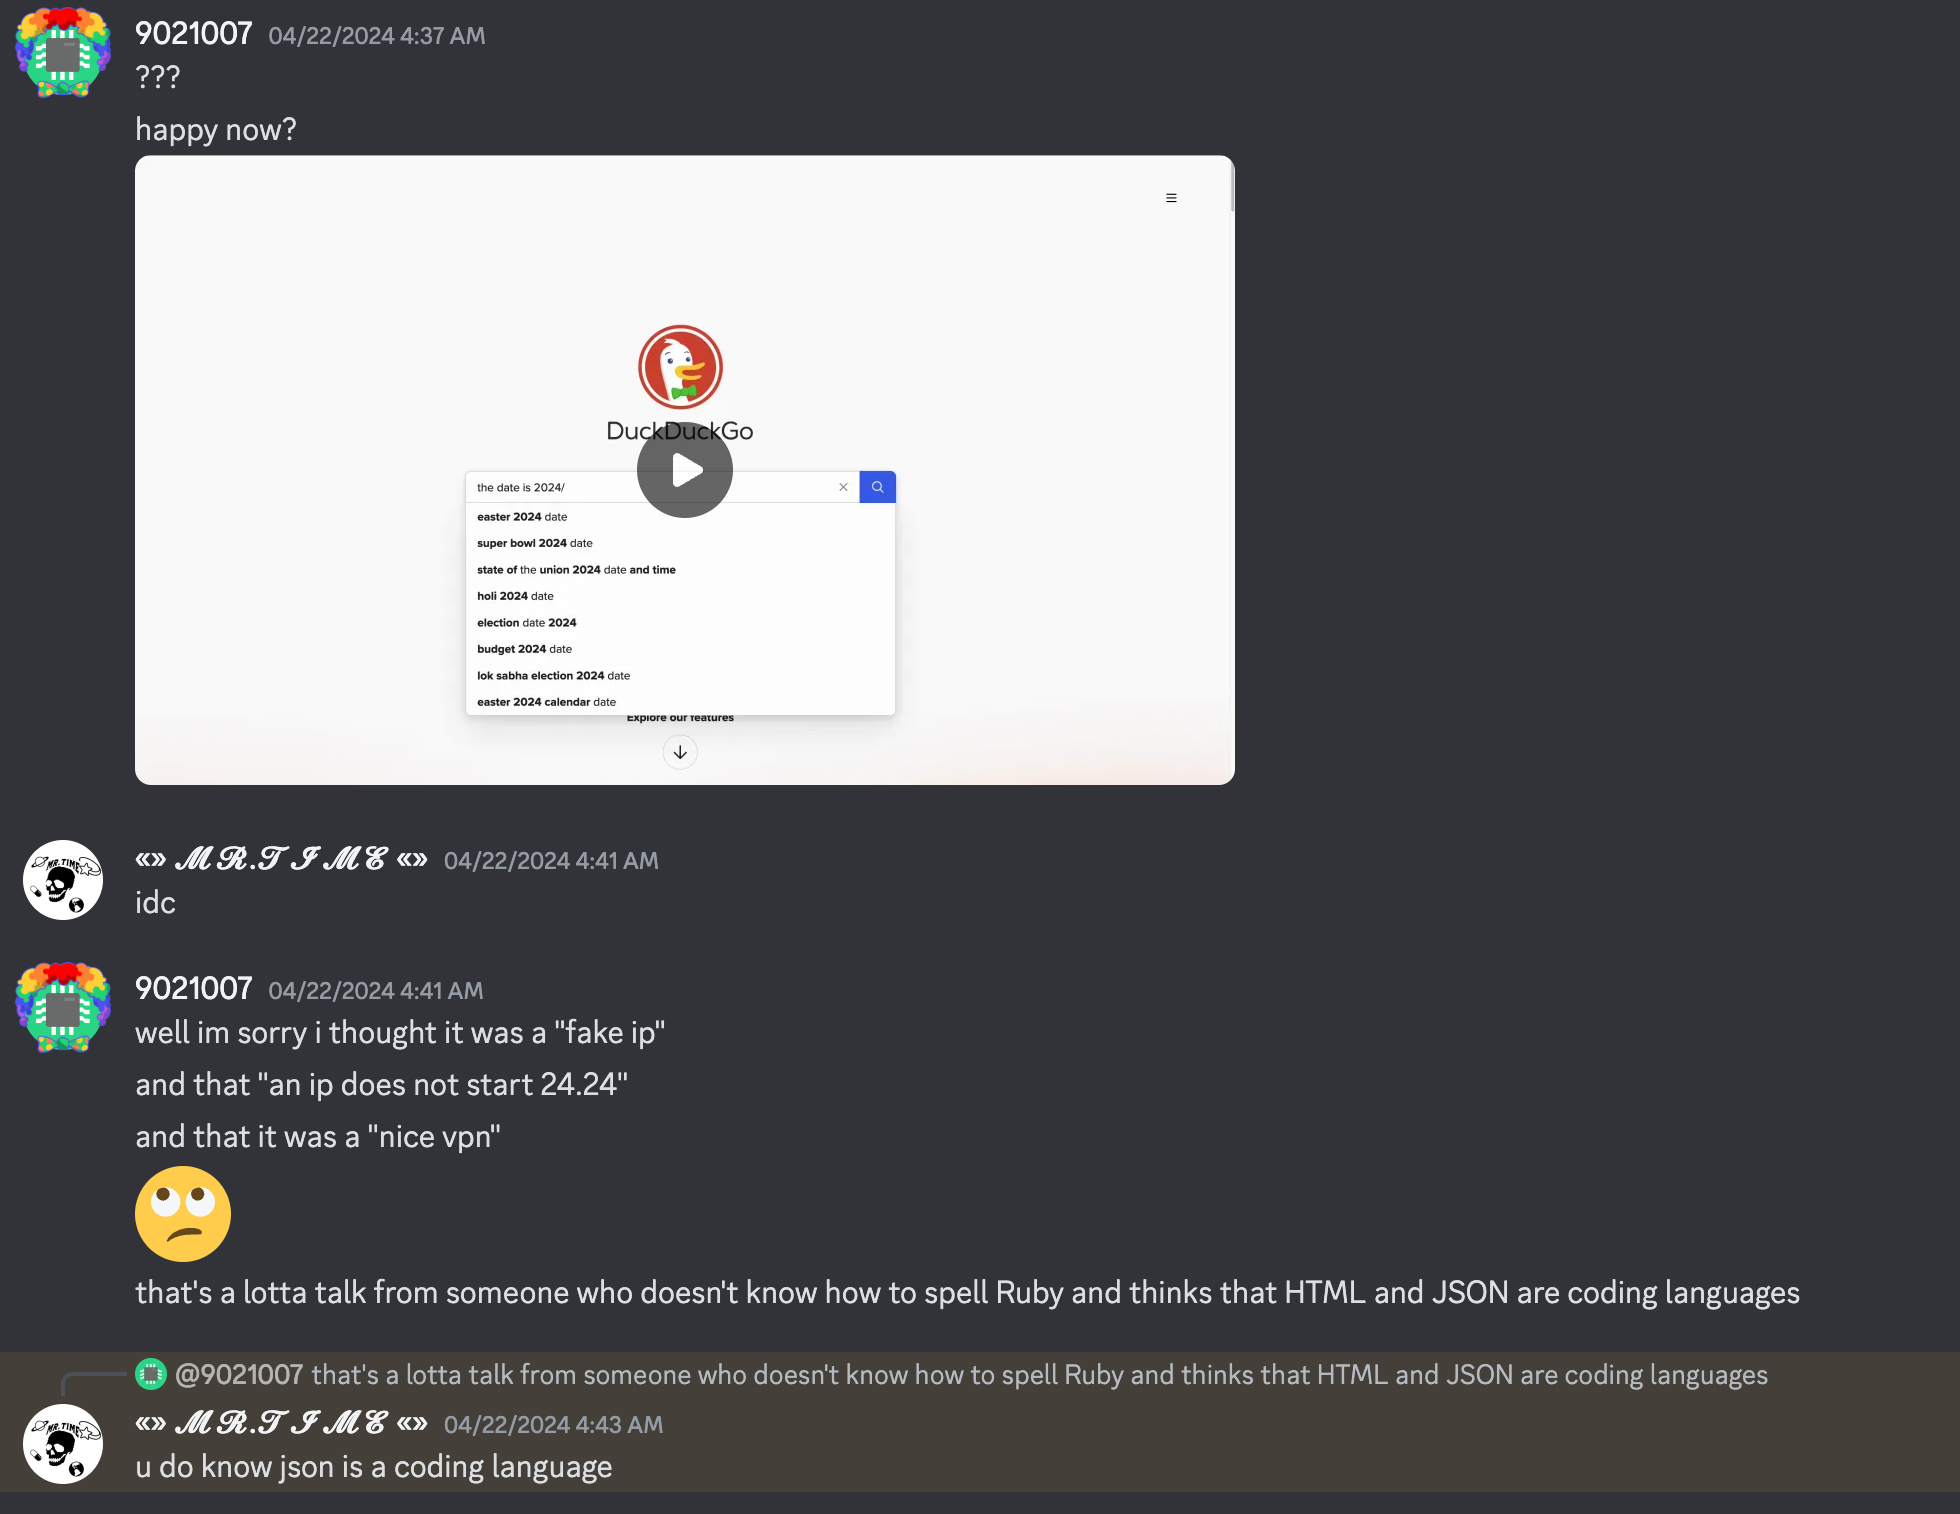 9021007 says "???", "happy now?", attached video, thumbnail is duckduckgo. mr.time says "idc", 9021007 says "well im sorry i thought it was a "fake ip" and that "an ip does not start 24.24" and that it was a "nice vpn"", "that's a lotta talk from someone who doesn't know how to spell Ruby and thinks that HTML and JSON are coding languages", mr.time replies, "u do know json is a coding language"